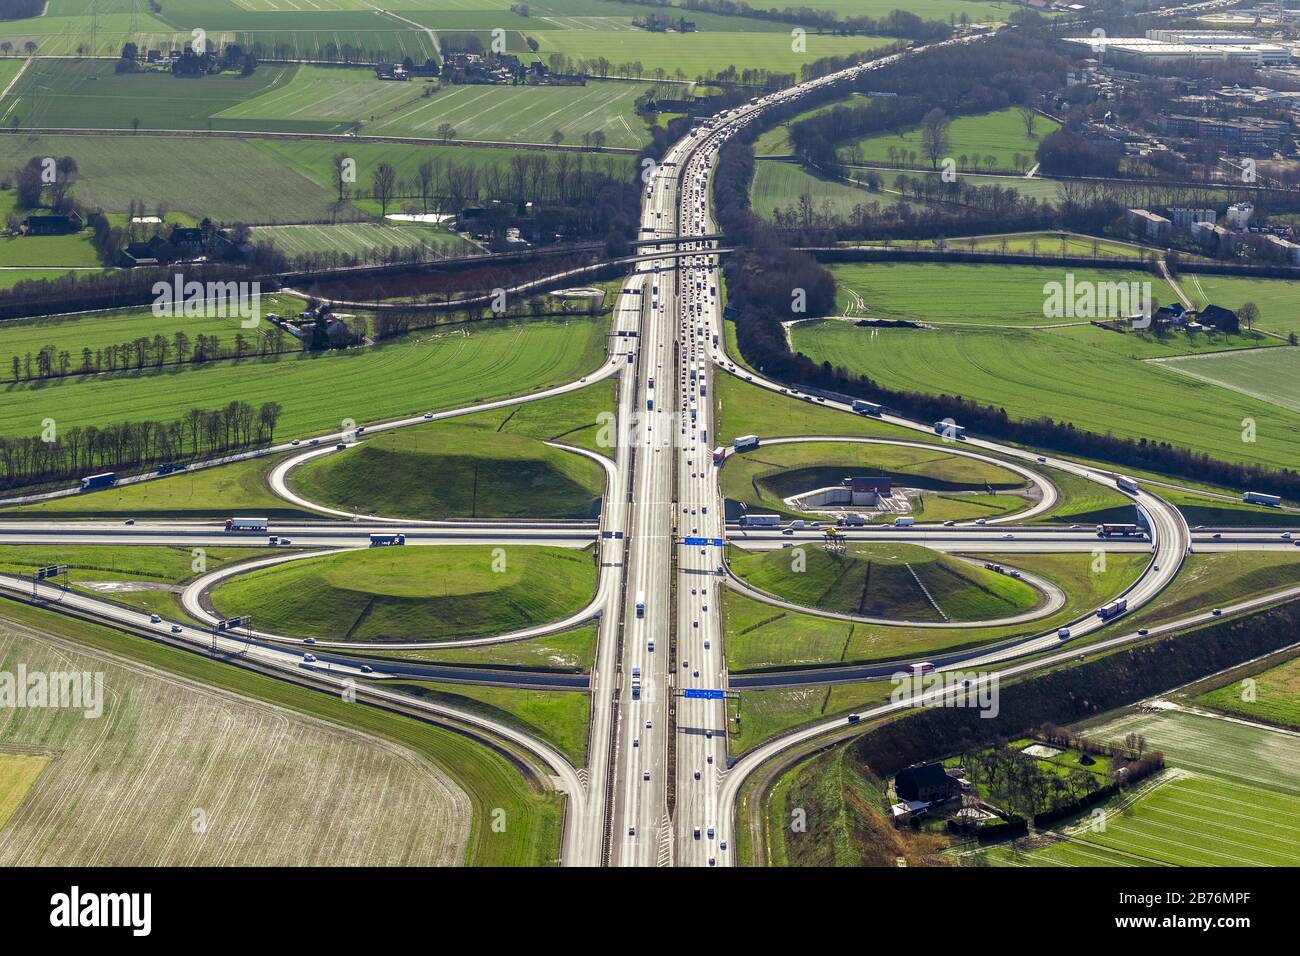 , Intersection of Highway A2 and A1, Kamener Kreuz, 14.02.2014, aerial view, Germany, North Rhine-Westphalia, Ruhr Area, Kamen Stock Photo